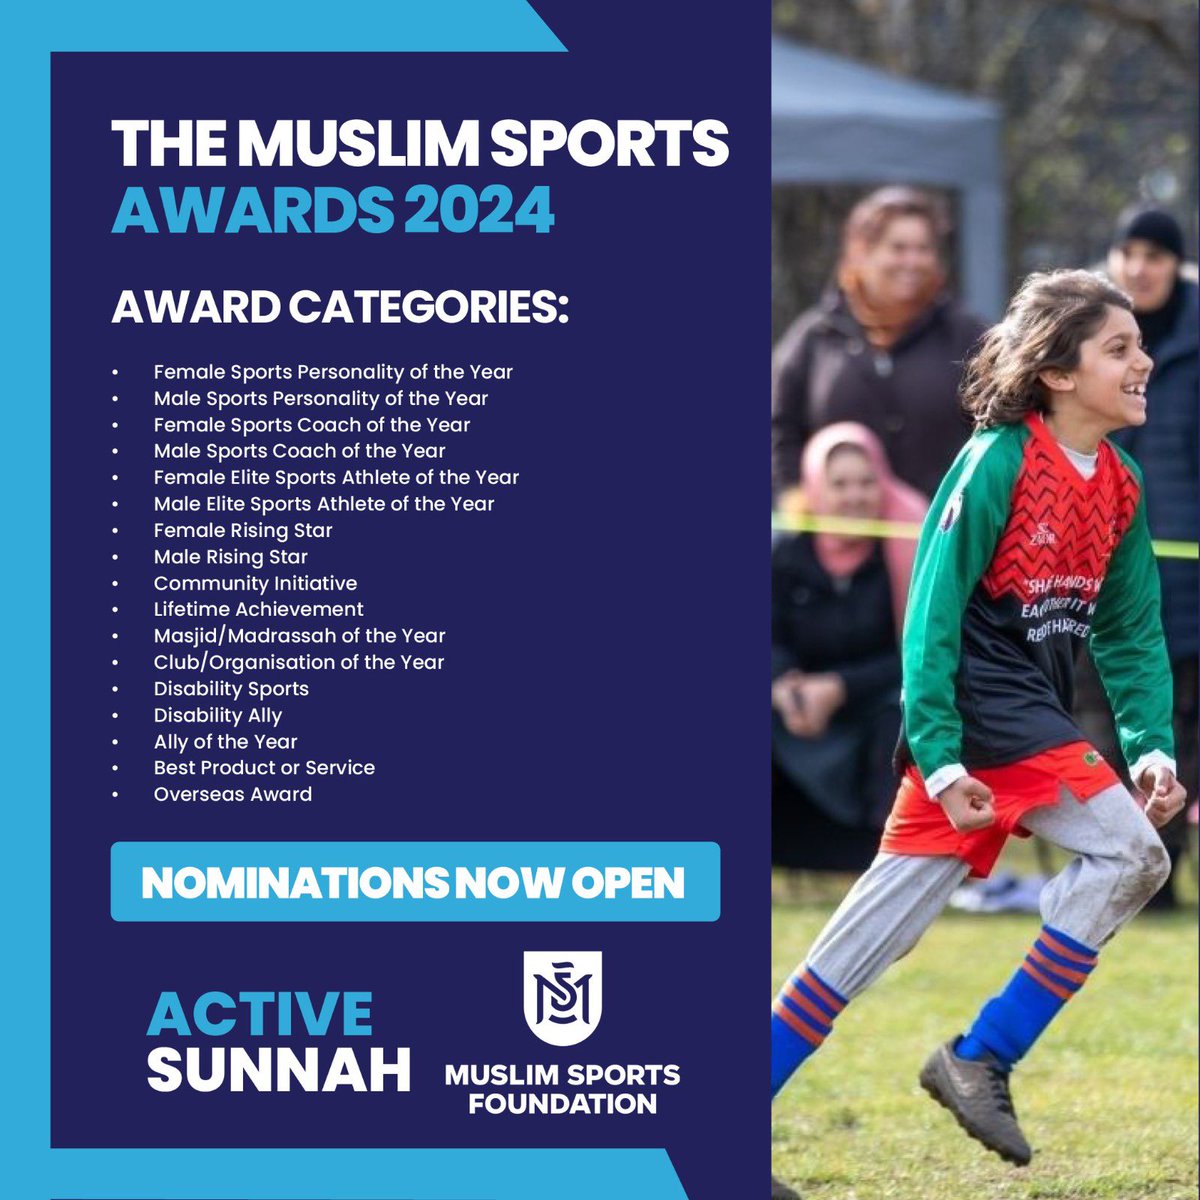 Exciting news from the Muslim Sports Foundation for the British Muslim community! We’re delighted to announce nominations for the 2024 Muslim Sports Awards are now OPEN! Click on the link in our bio! #msf